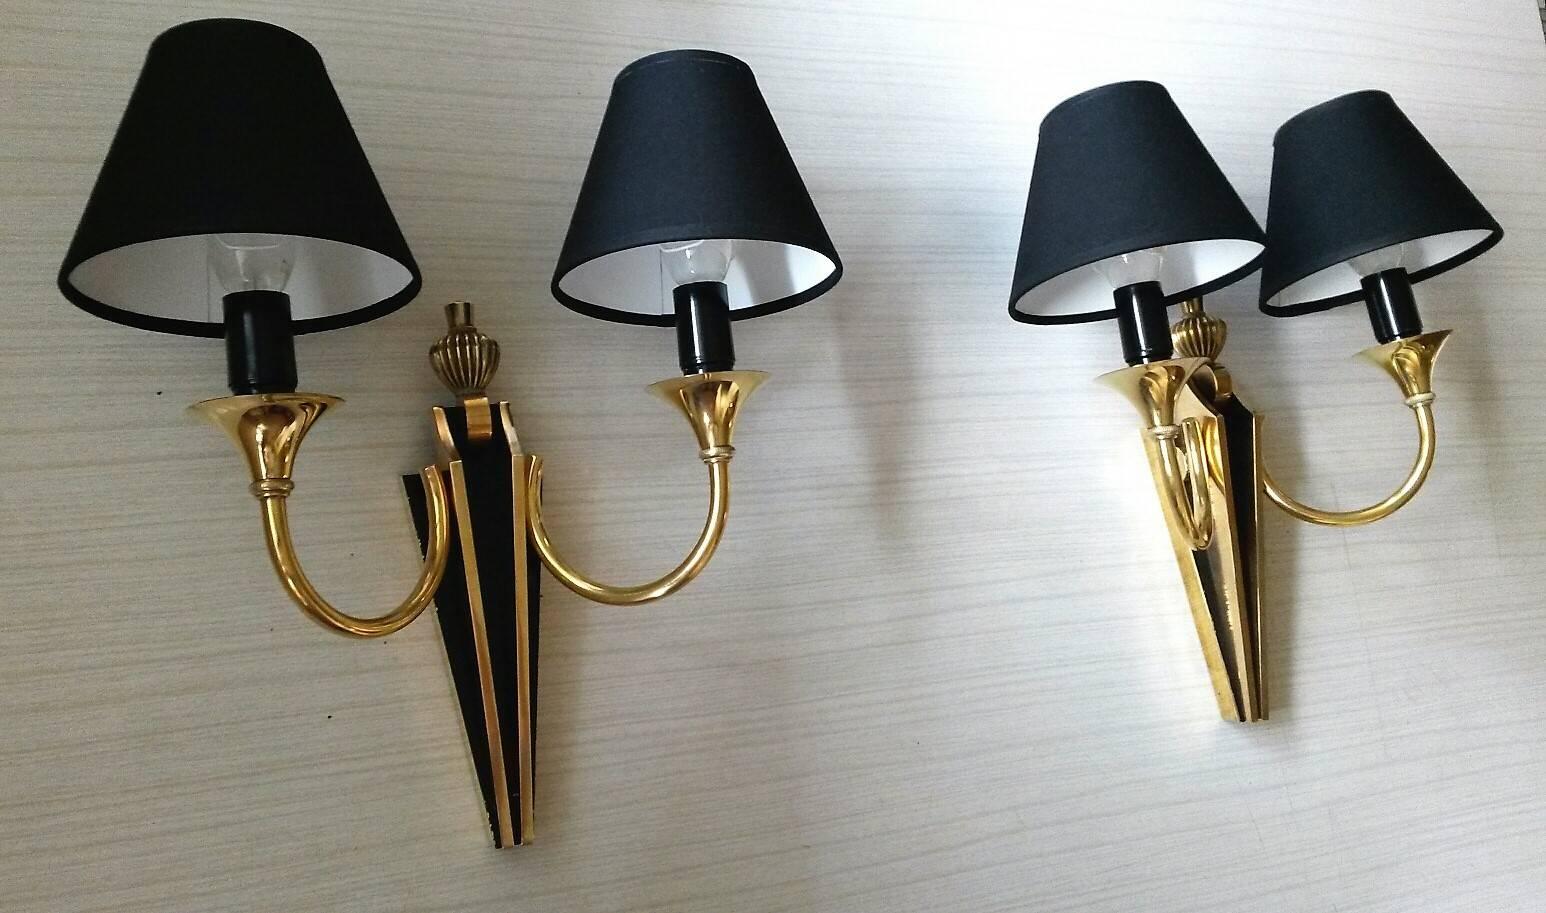 Mid-20th Century Stunning French Neoclassical Style Pair of Two-Arm Sconces by Maison Jansen